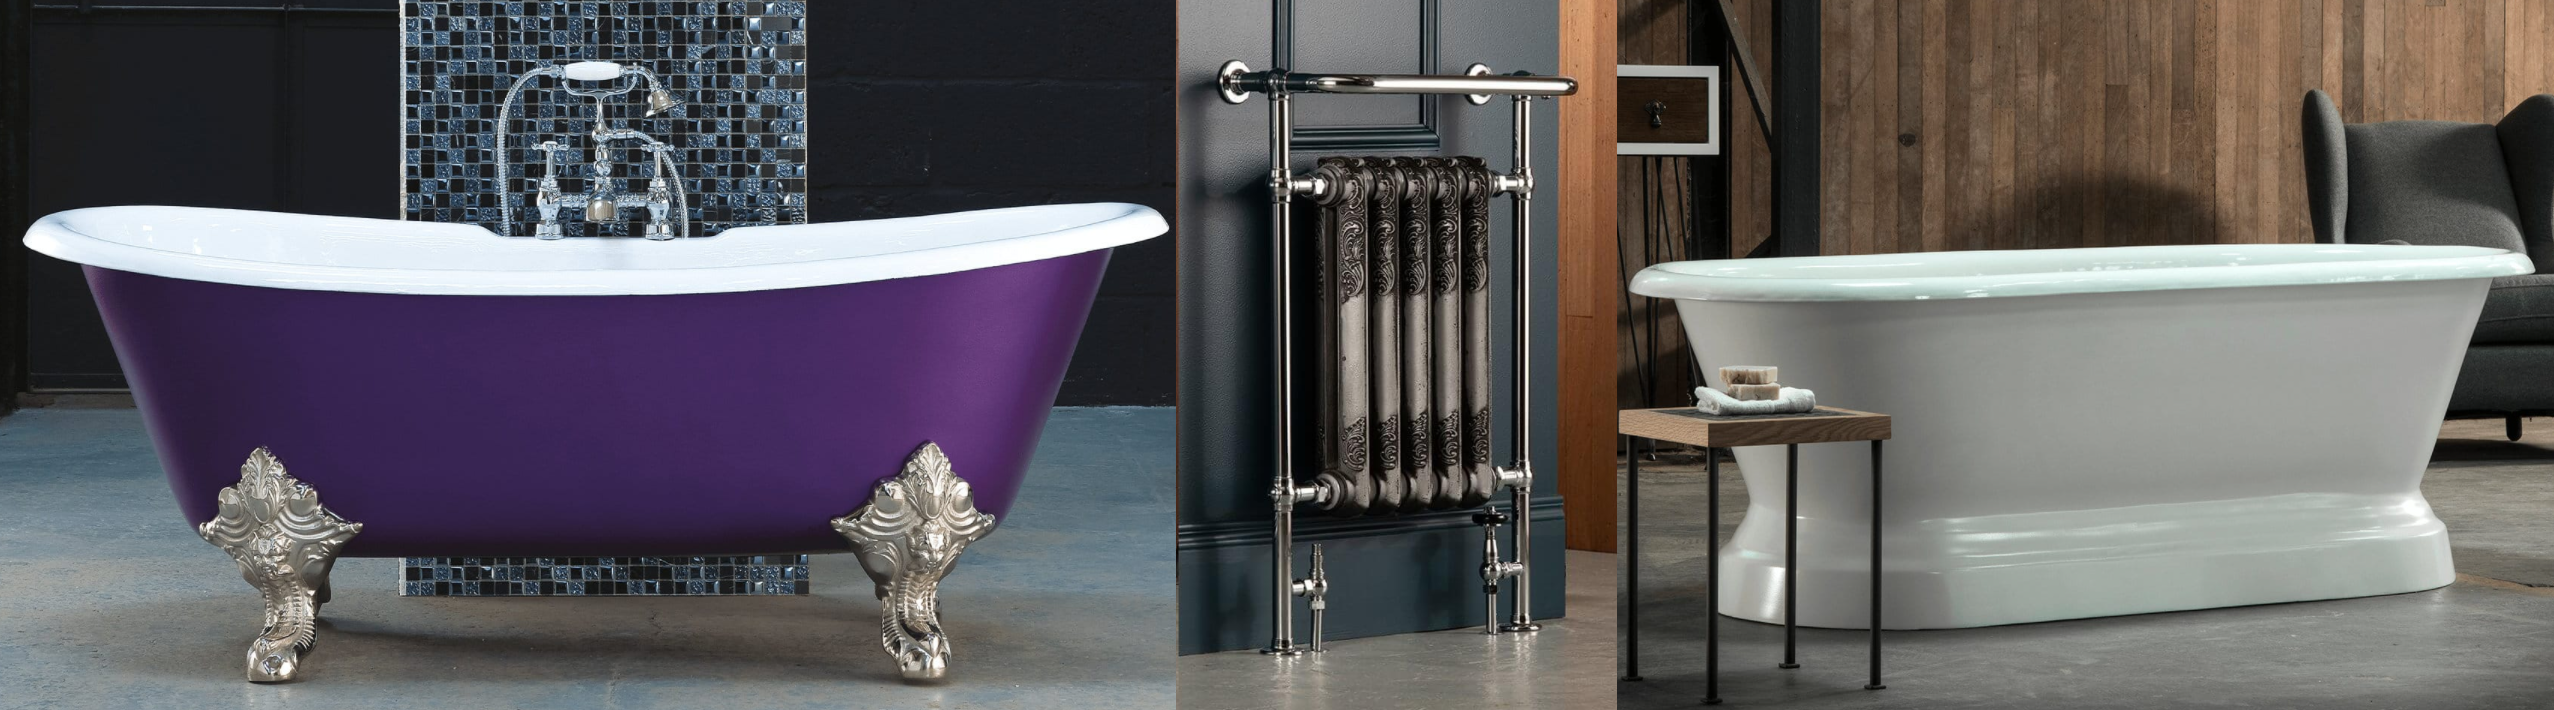 Arroll Traditional Cast Iron Baths and Towel Rail Available Online at UKAA